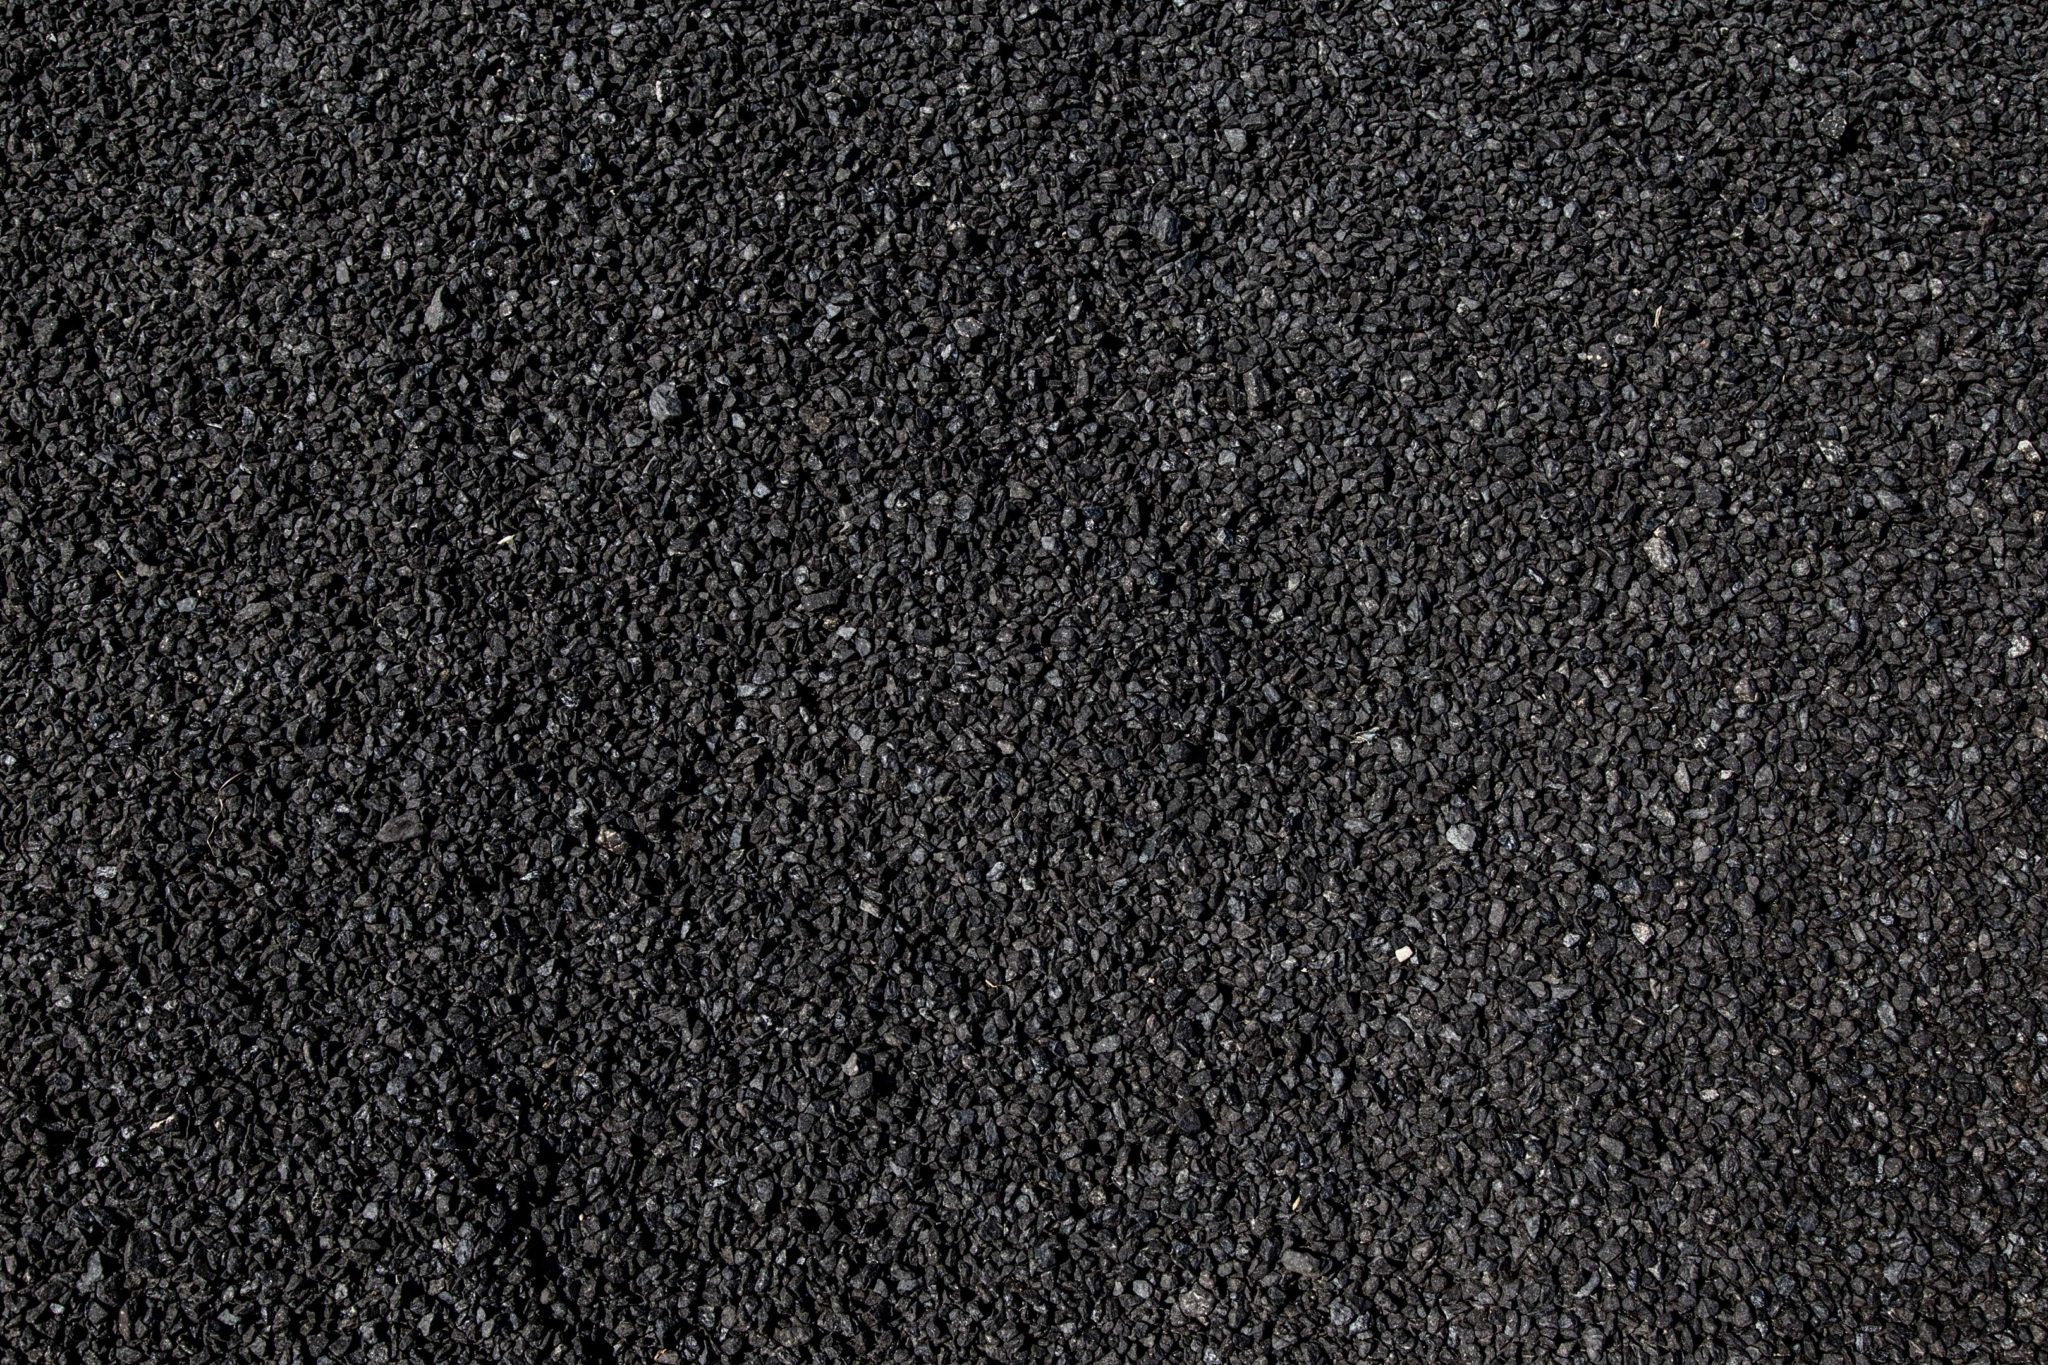 close-up view of black granules on a shingle